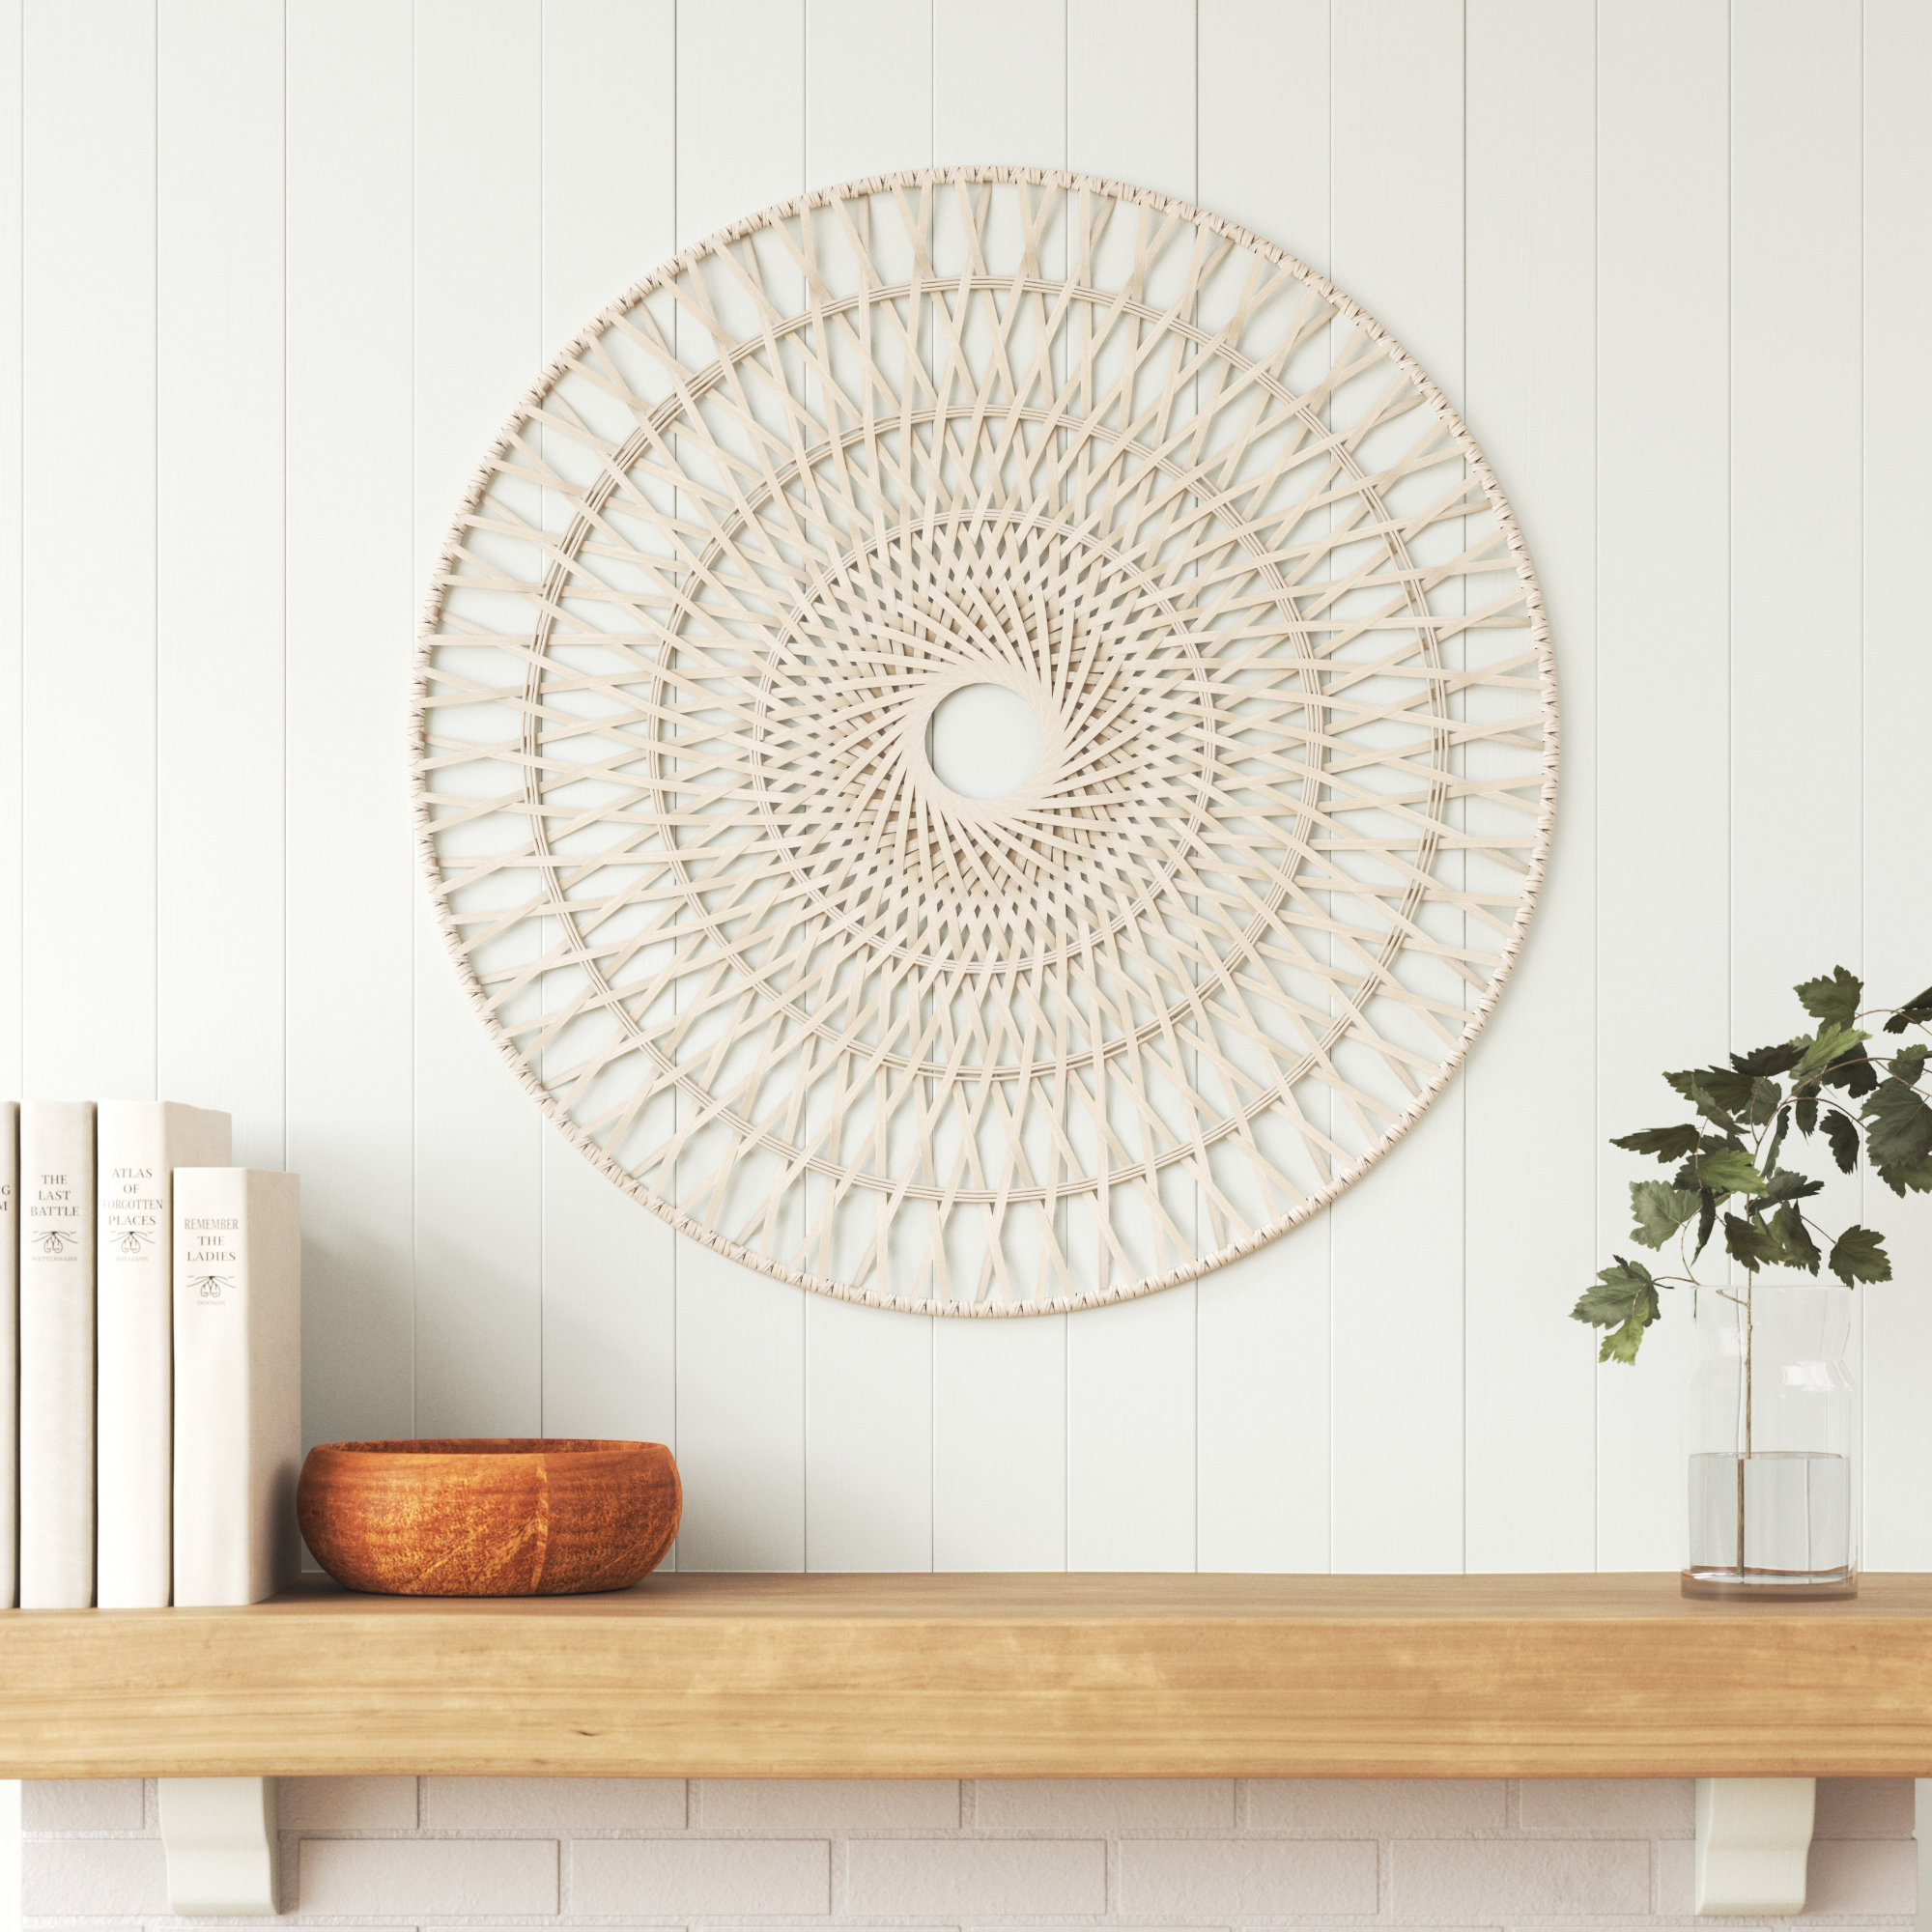 36 Round Wicker Wall Decor - Brown Hanging Decorative Circle - Contemporary Rustic Decor for Home or Office - Creative Bedroom Decoration Sand & Stab